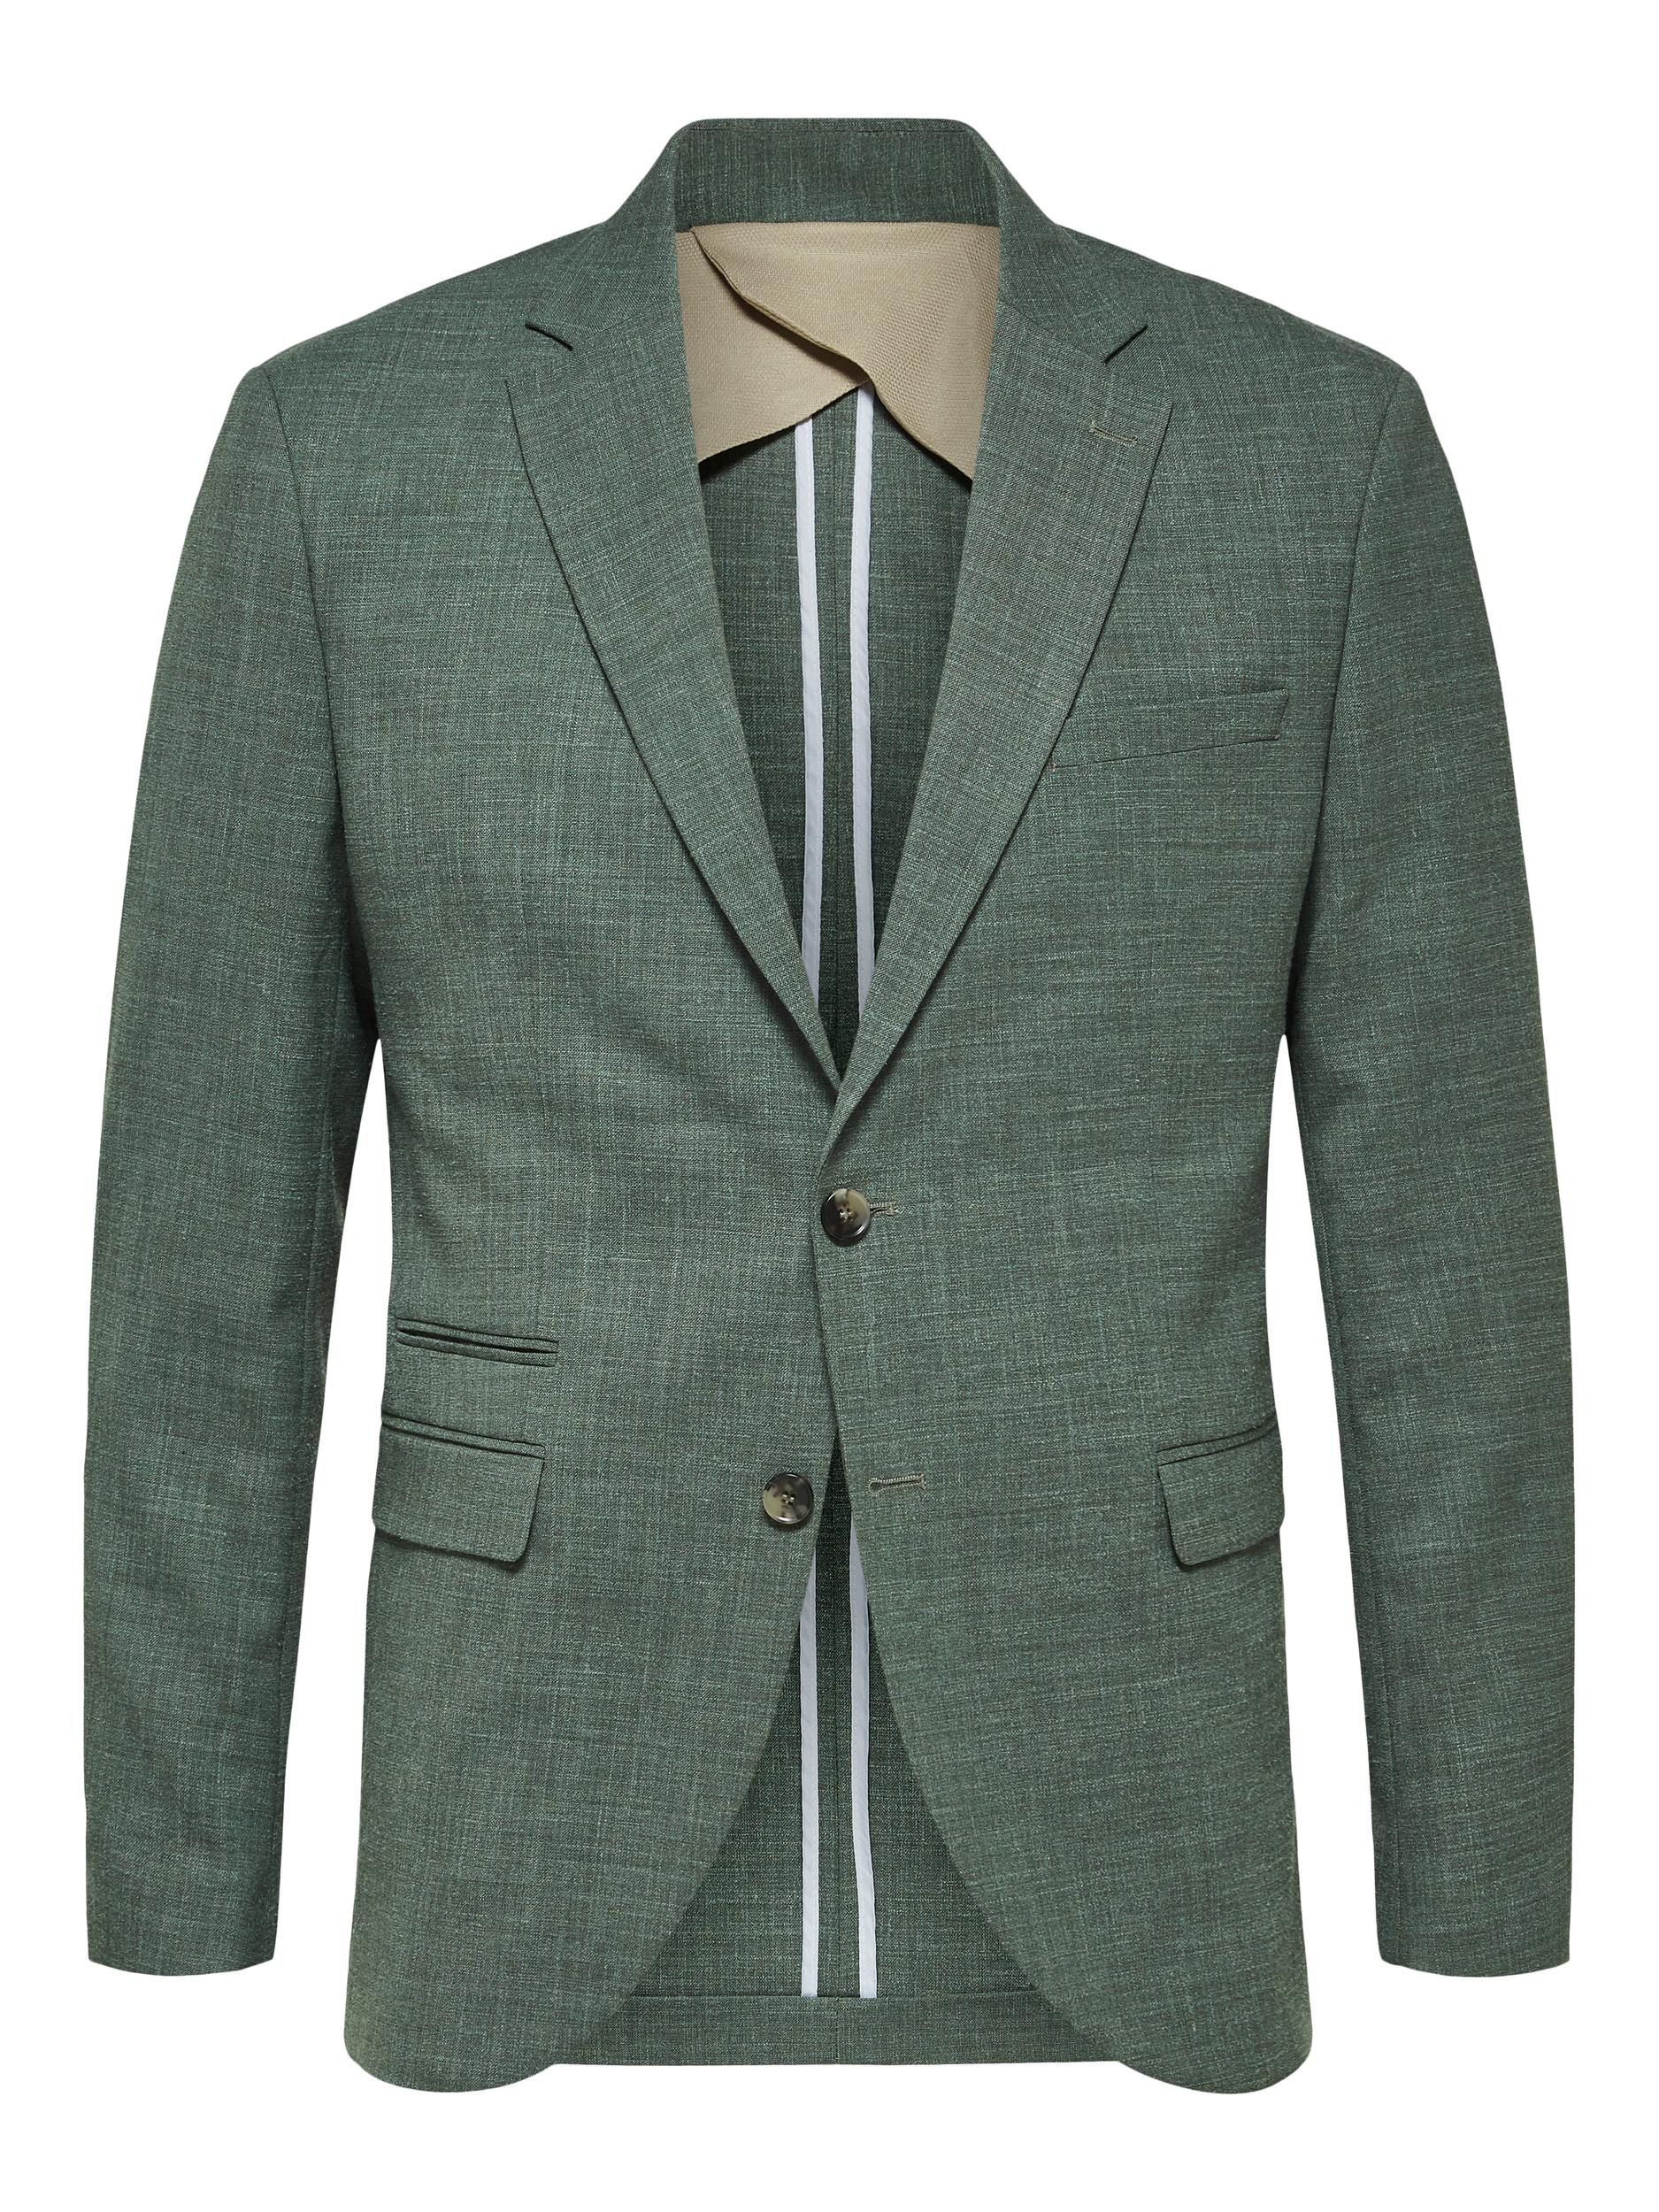 Occasioni ld4Gi SELECTED HOMME Giacca da completo Oasis in Verde 